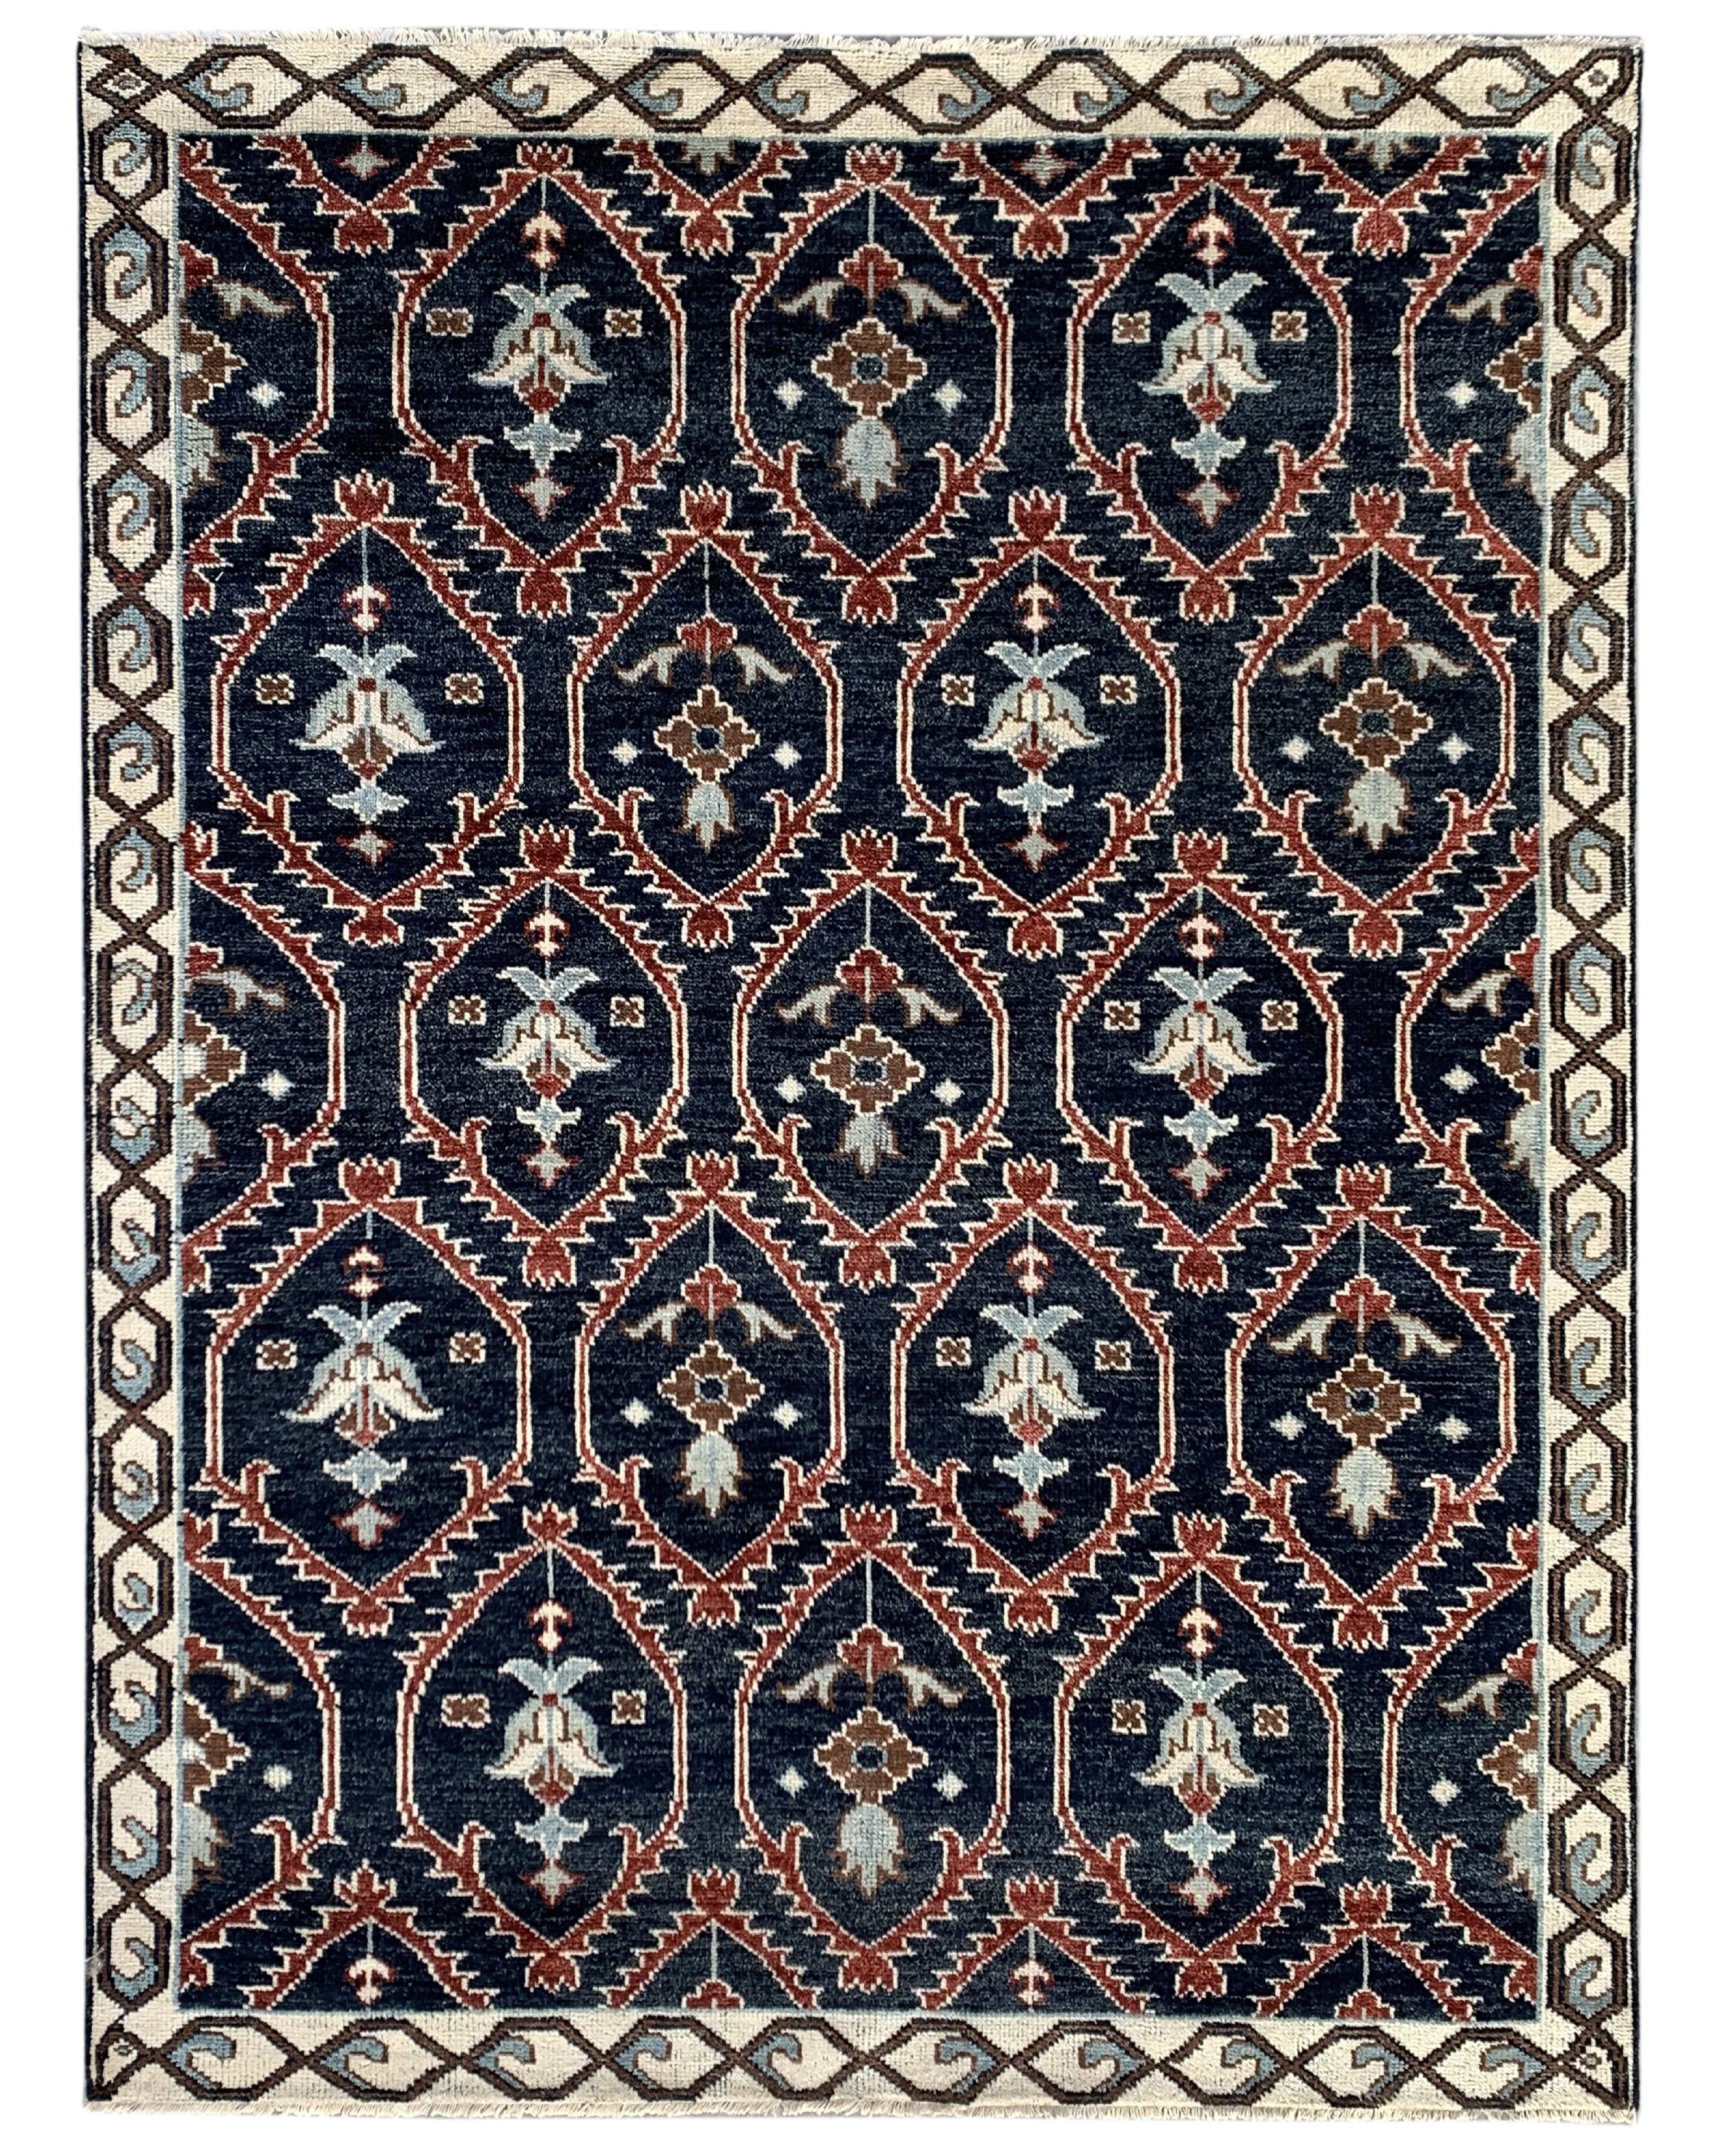 Olive Green 8' x 10' EORC KC30783OL8X10 Handknotted Wool Bijar Collection Rug 